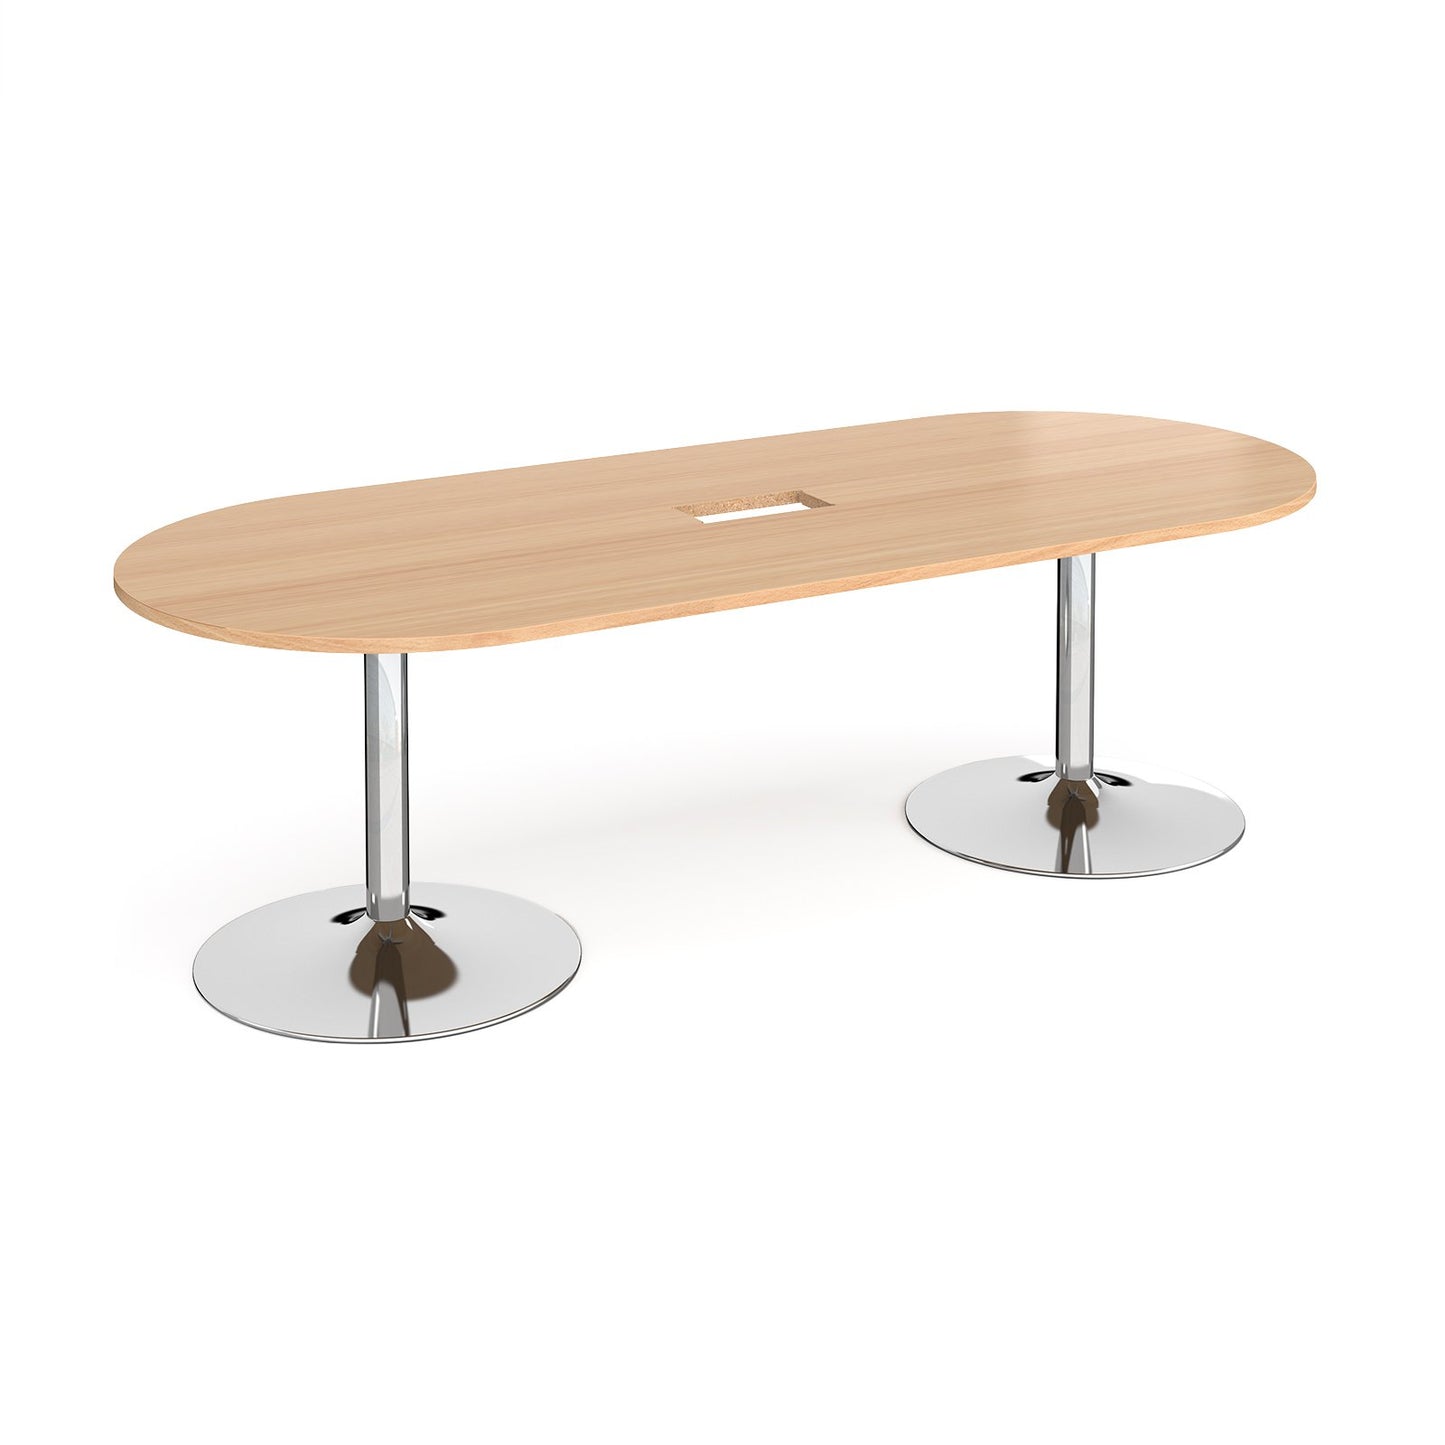 Trumpet base radial end power ready boardroom table